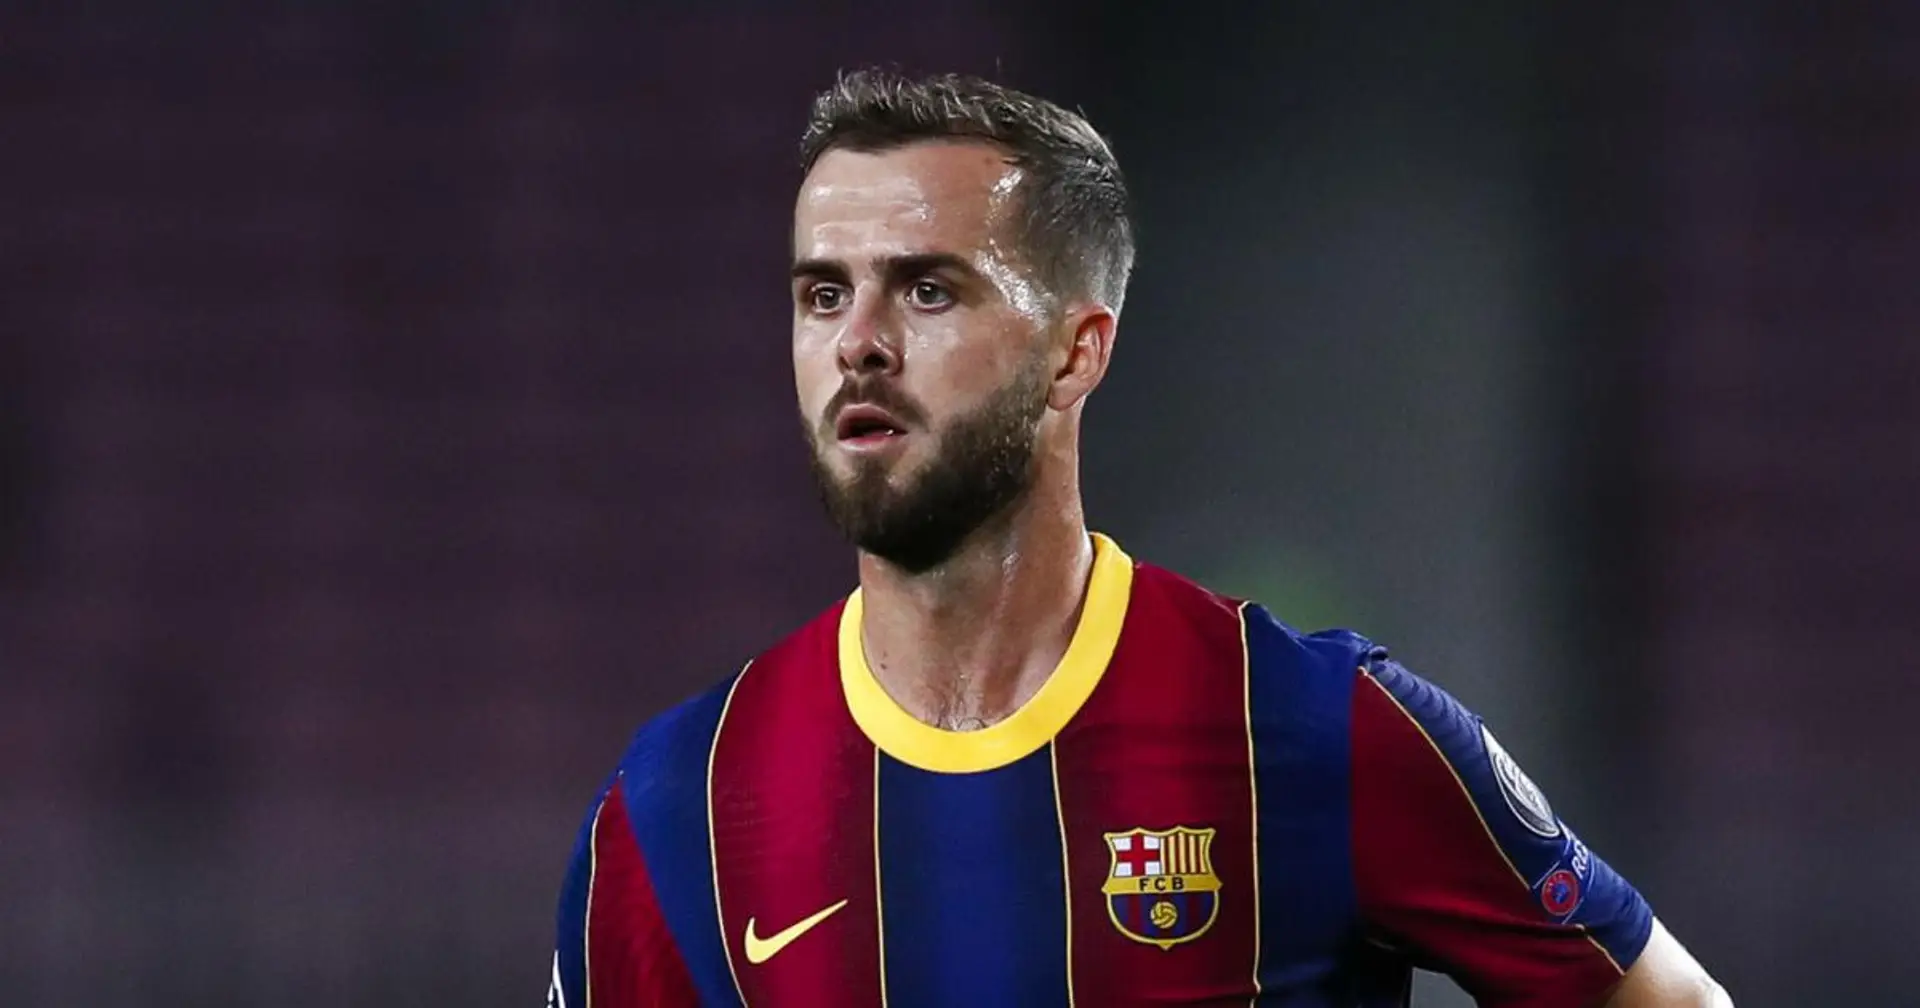 Miralem Pjanic is fluent in 6 foreign languages: Here's how it's possible